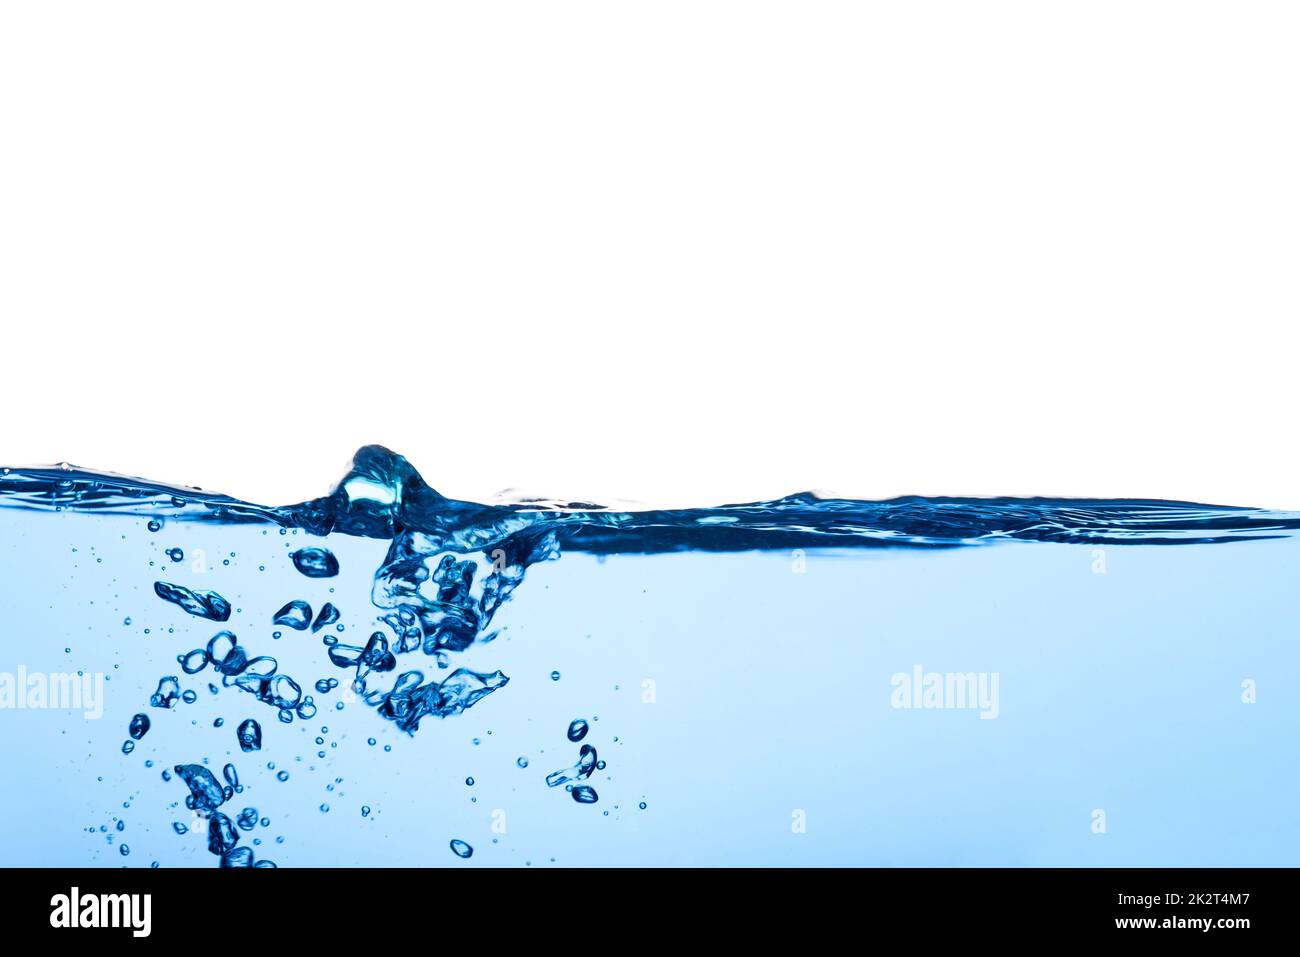 Abstract clean flow ripple surface on liquid Stock Photo